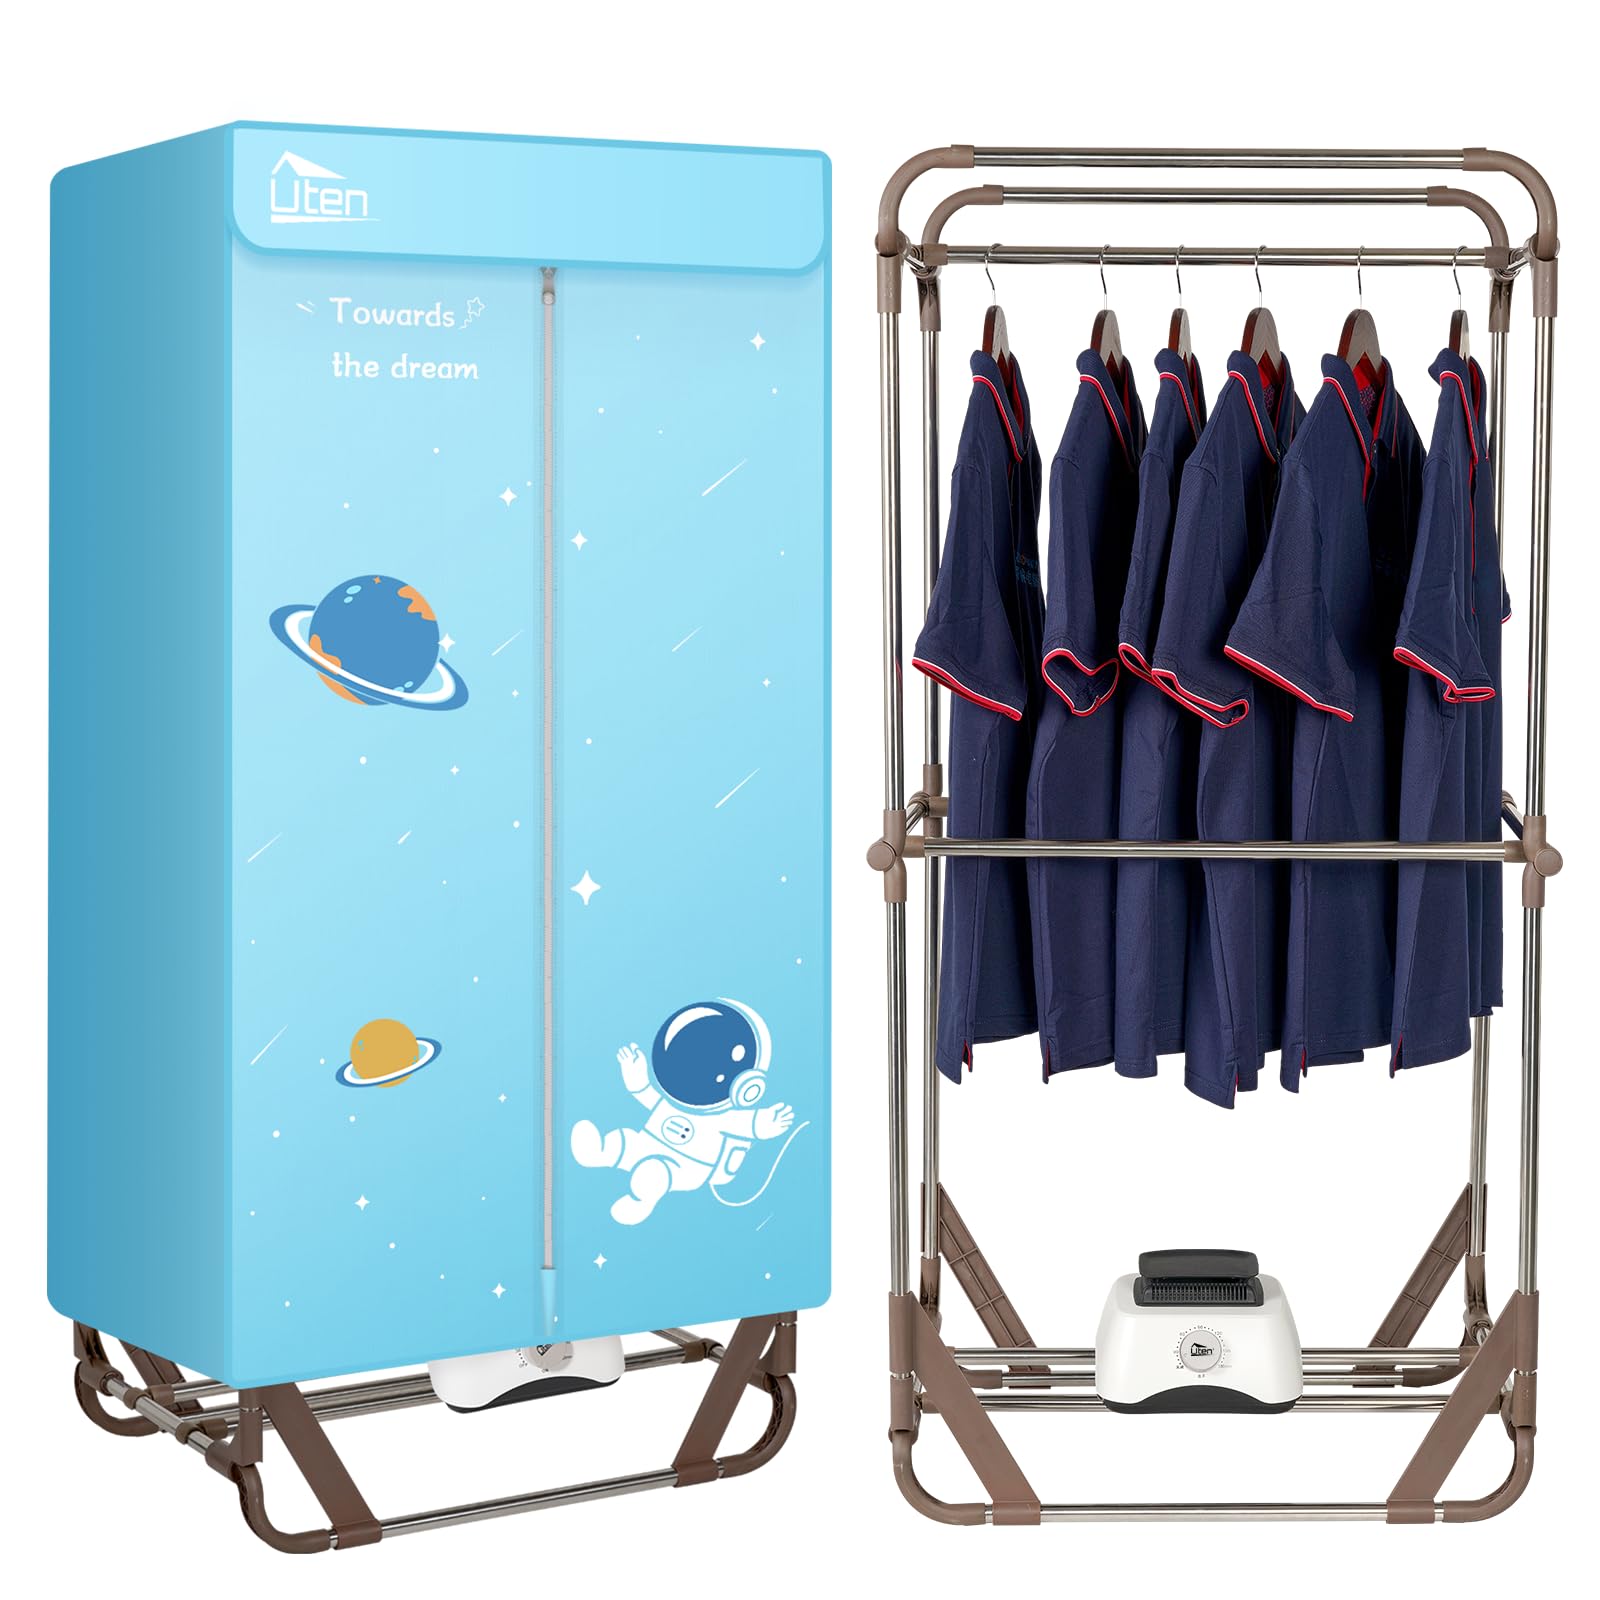 Uten Portable Clothes Dryer, 1500W Power Electric Clothes Dryer Machine with Timer, 2-Tier Portable Laundry Drying Wardrobe, Foldable Clothes Drying Rack and Dryer for Travel, Apartments, RV, Home